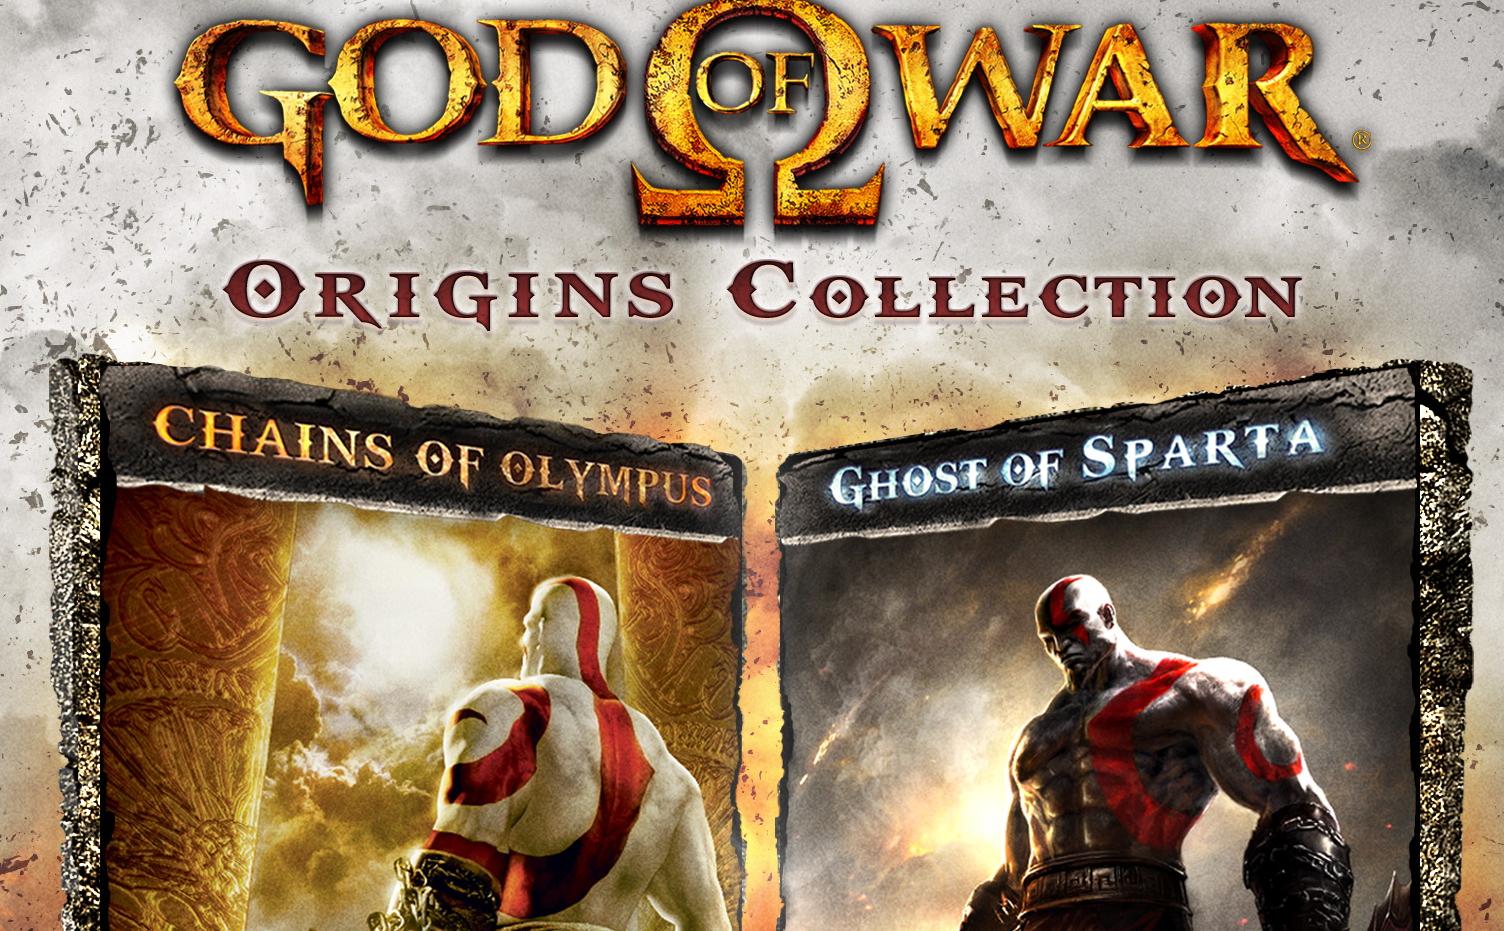 recenzja-god-of-war-origins-collection-ps3-gameonly-pl